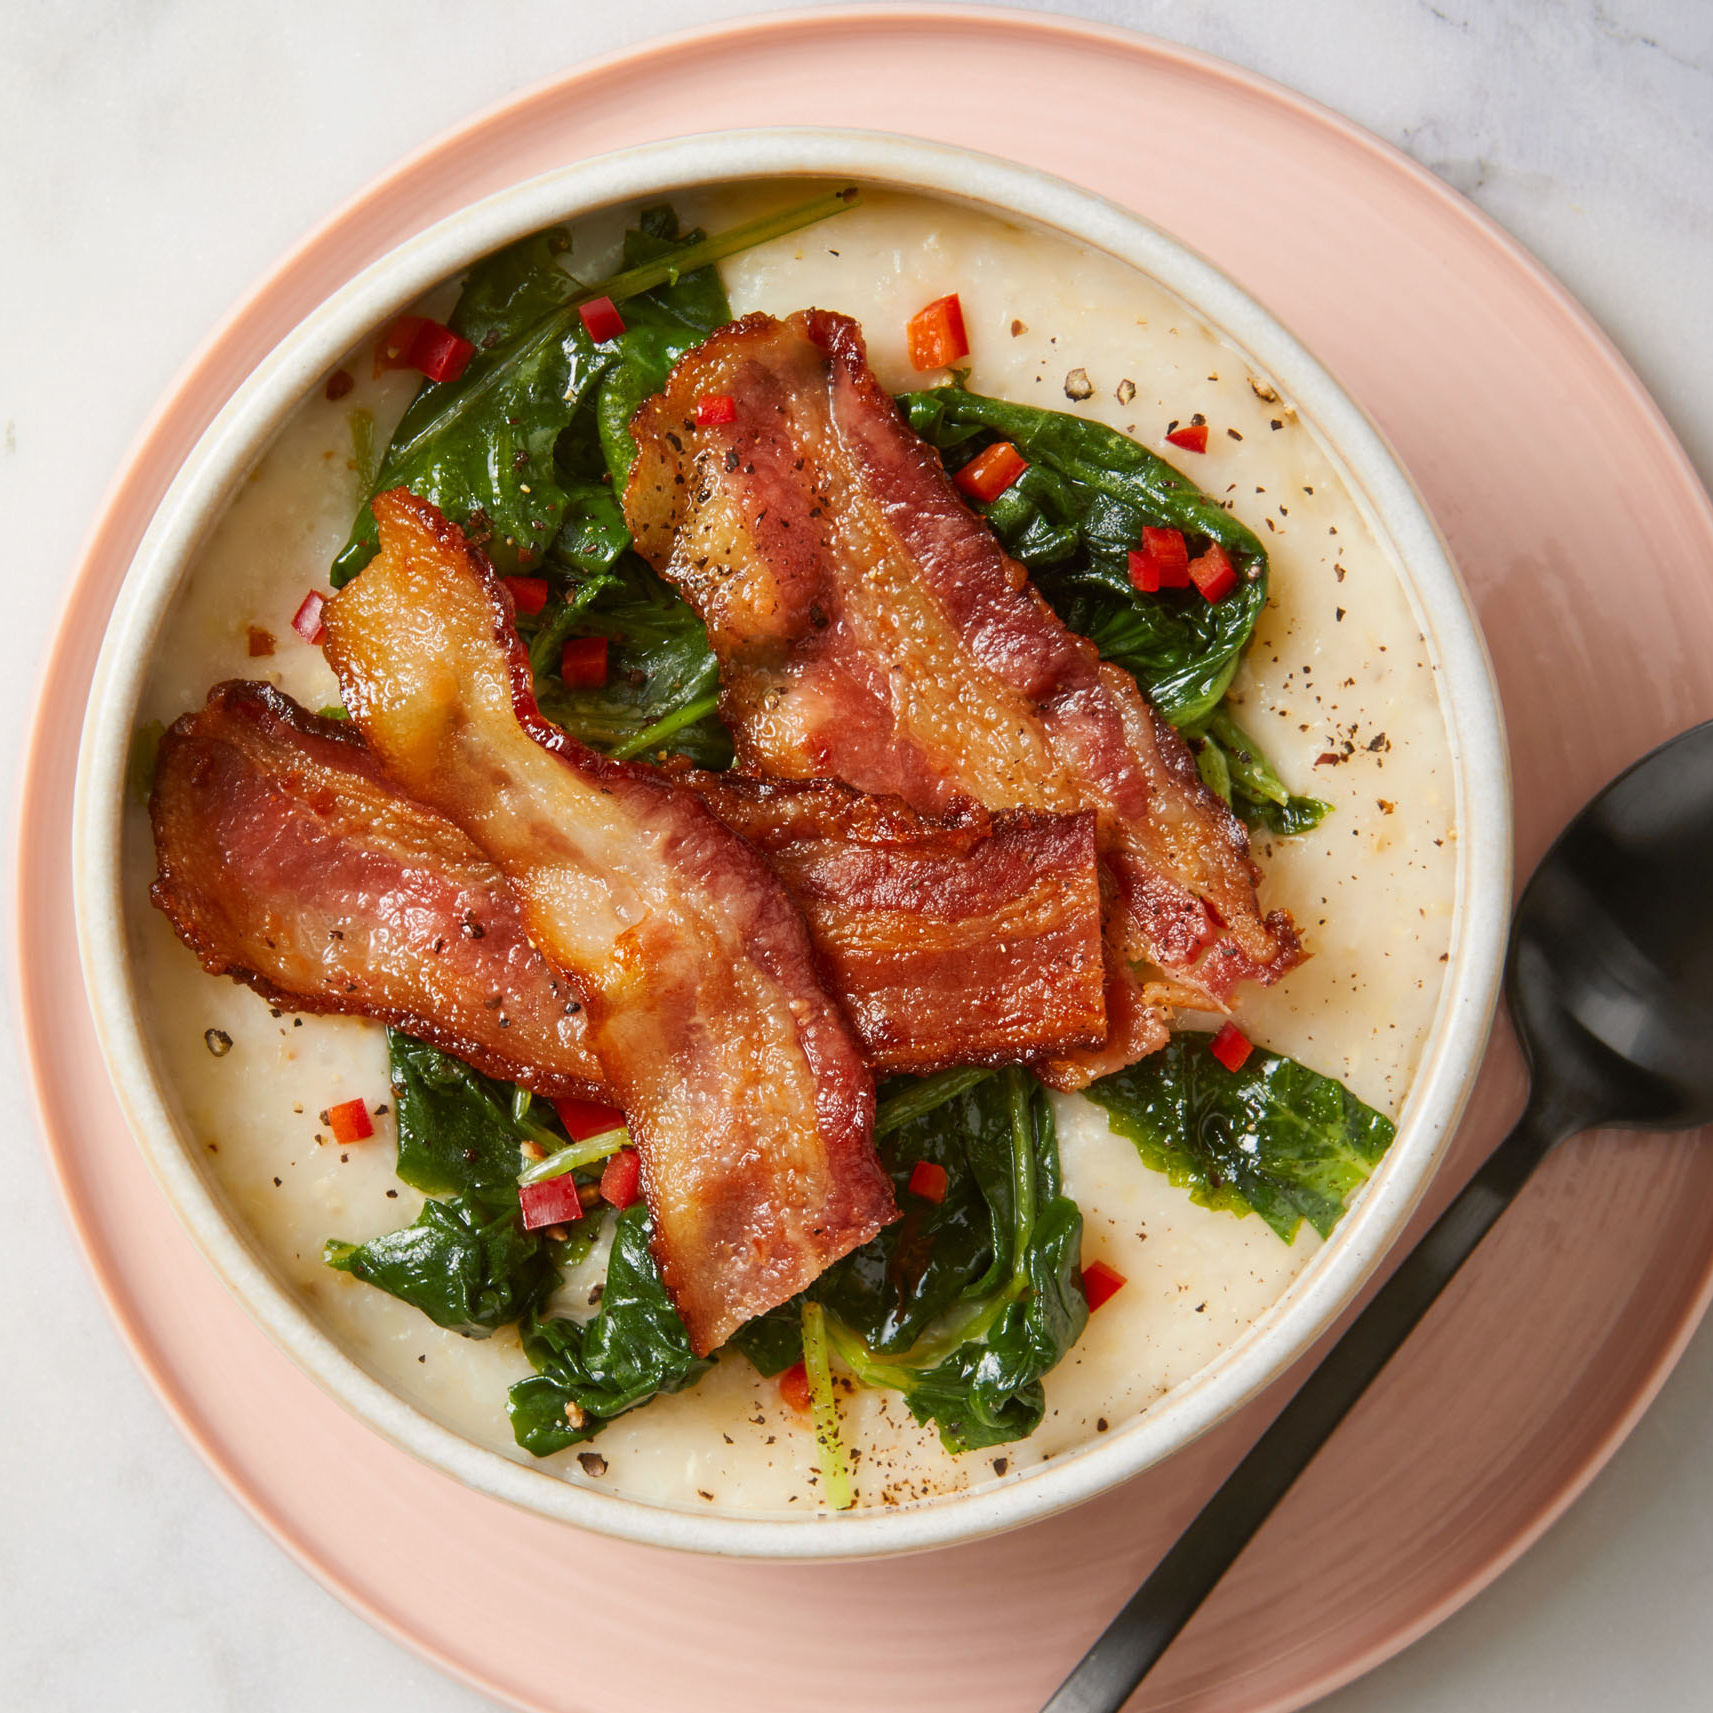 white cheddar grits with greens & bacon